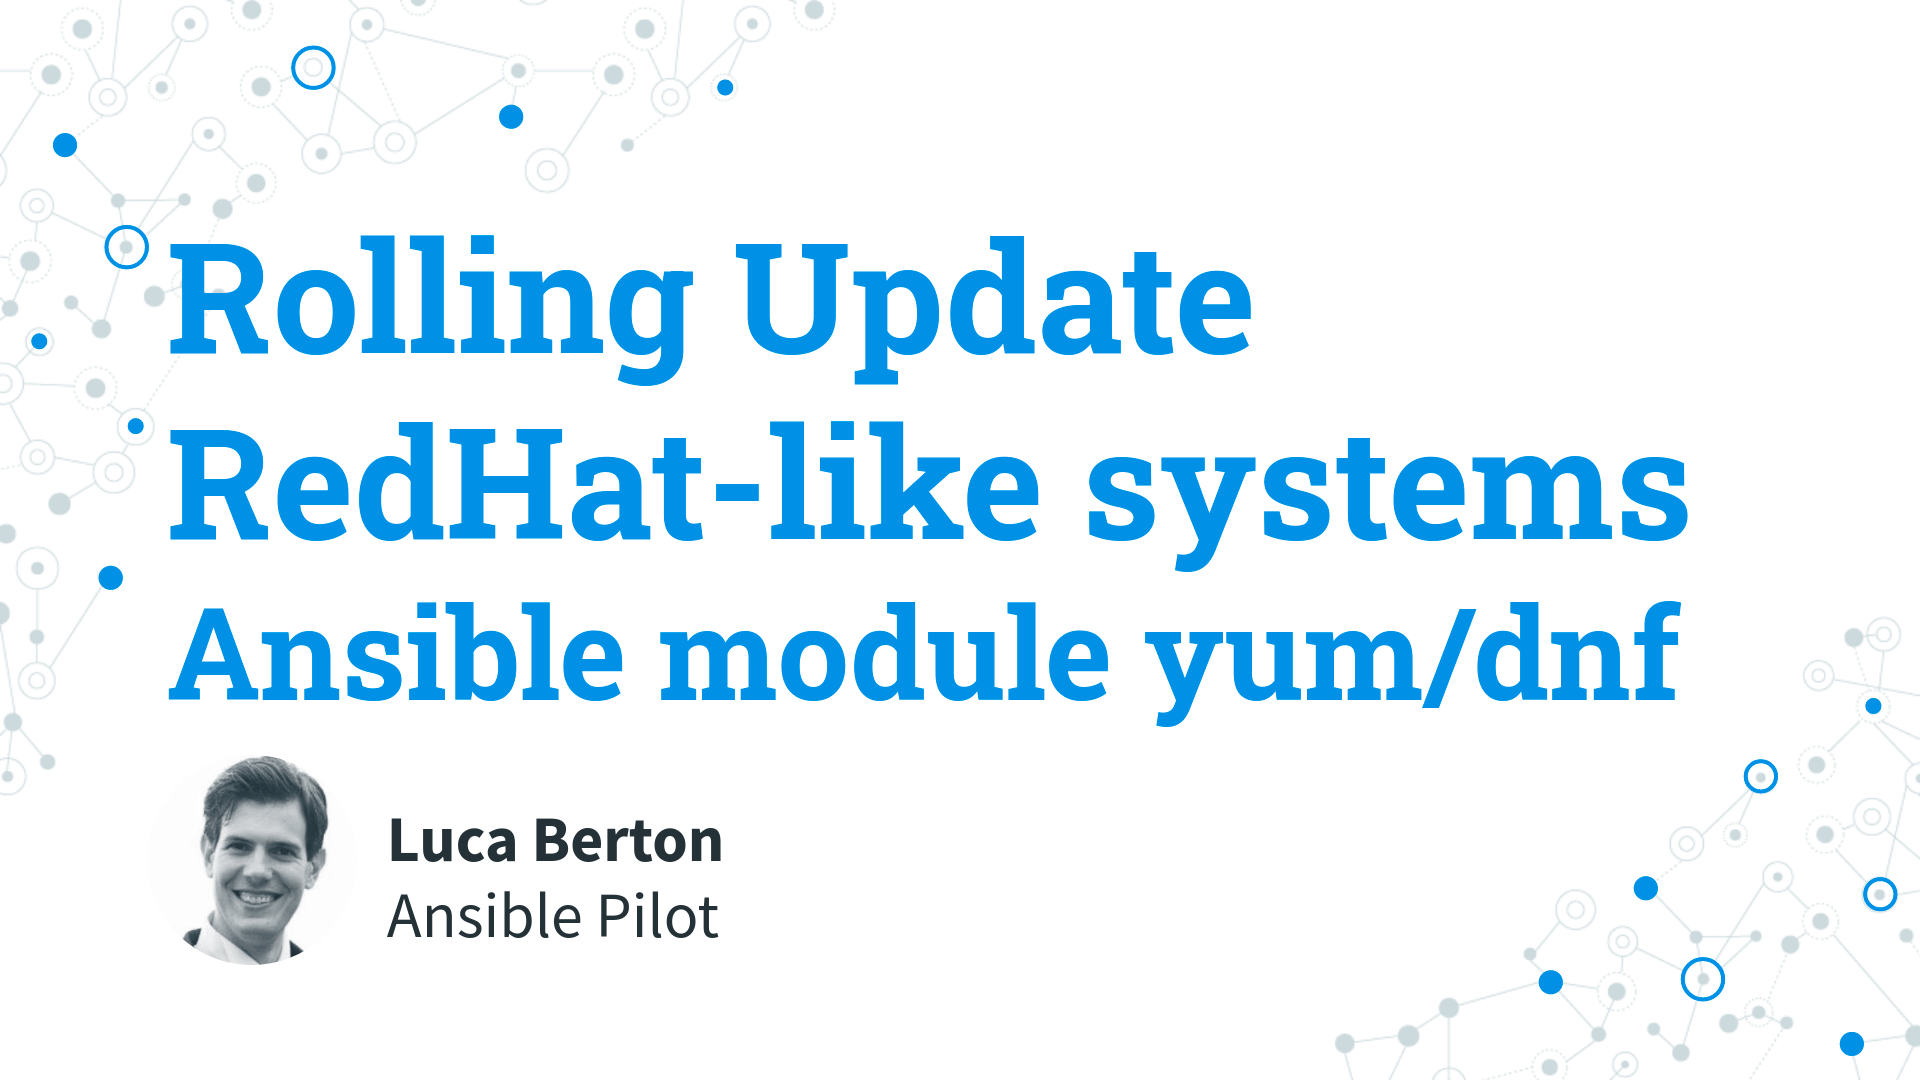 Rolling Update RedHat like systems - Ansible module yum